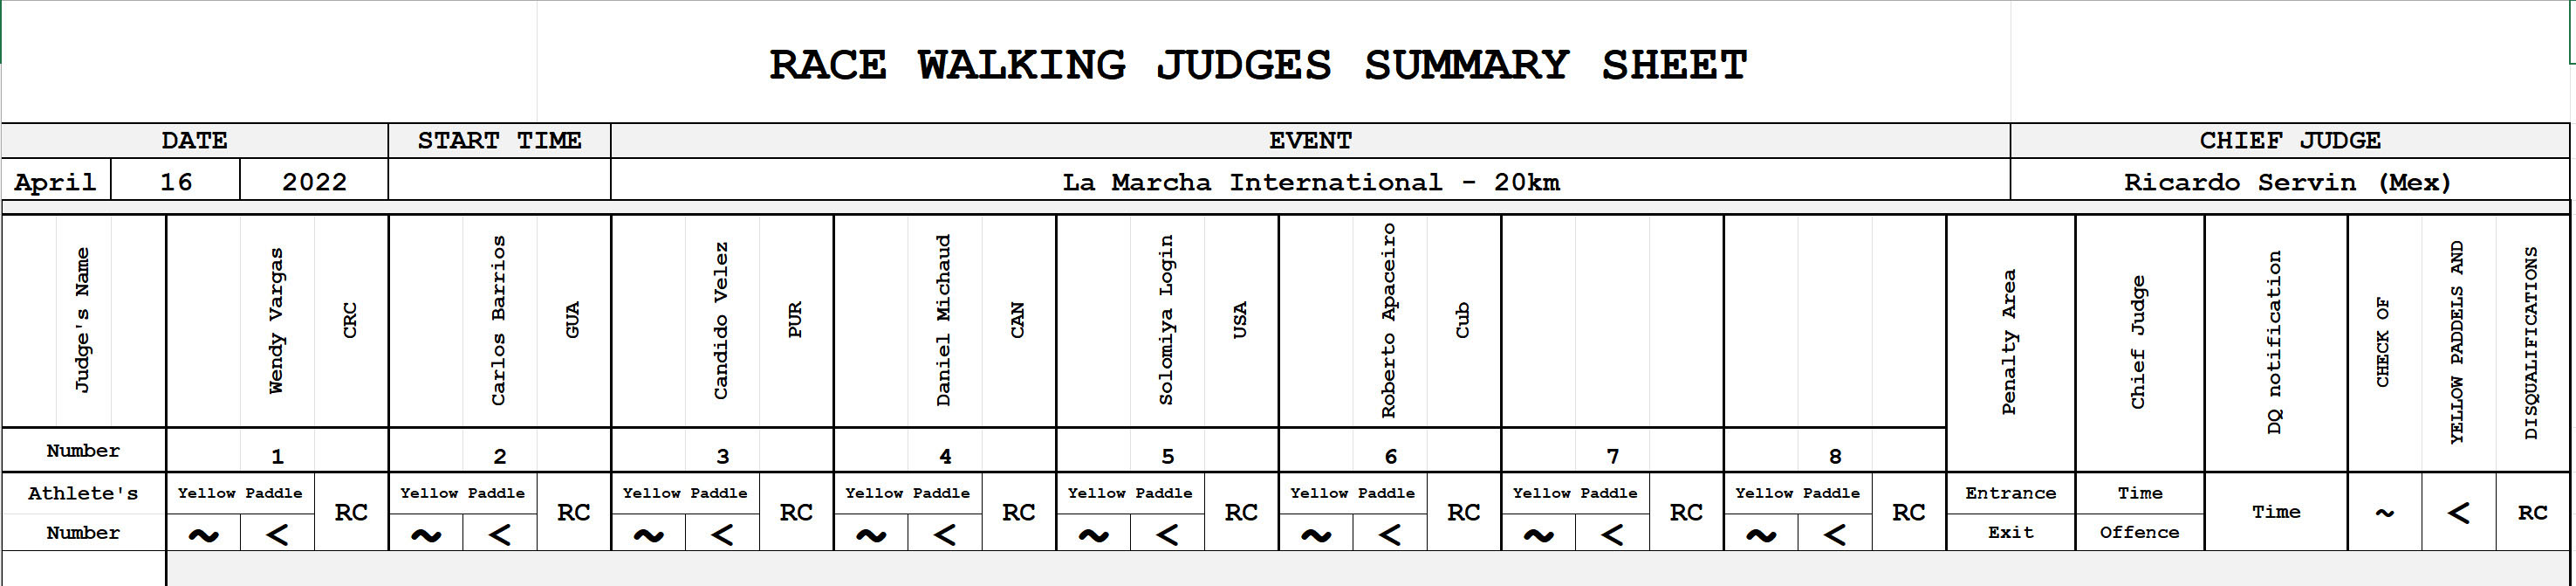 Summary Sheet with Judge Names